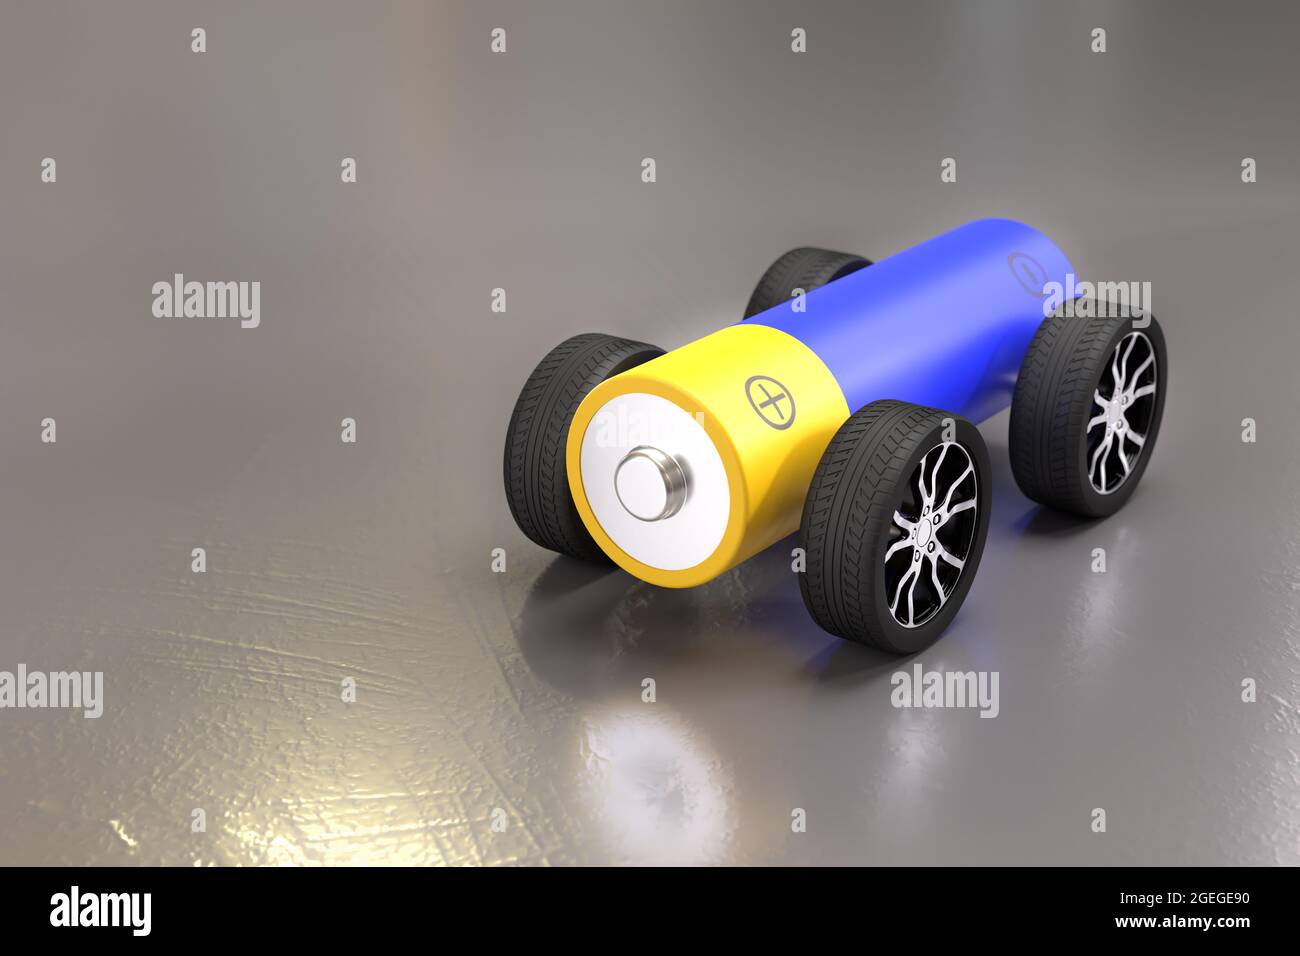 Electric vehicle concept - a battery on wheels. Stock Photo